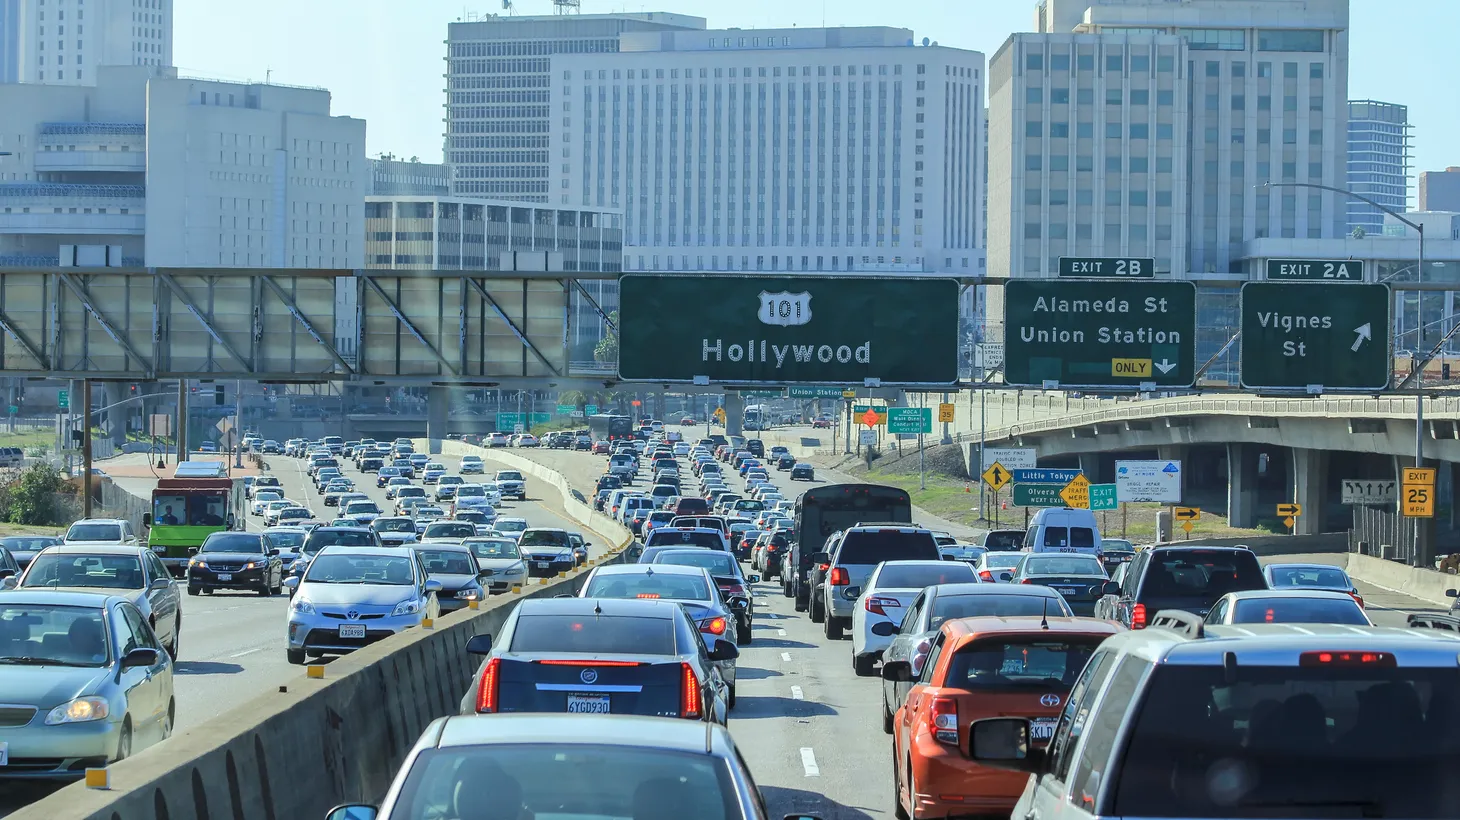 “If congestion pricing was implemented, all studies show that it would reduce pollution, it would reduce greenhouse gases. The idea really is: The higher you put up the price, the less people are willing to go and pay for it. So that would really change the commuting patterns,” says LA Times reporter Rachel Uranga.